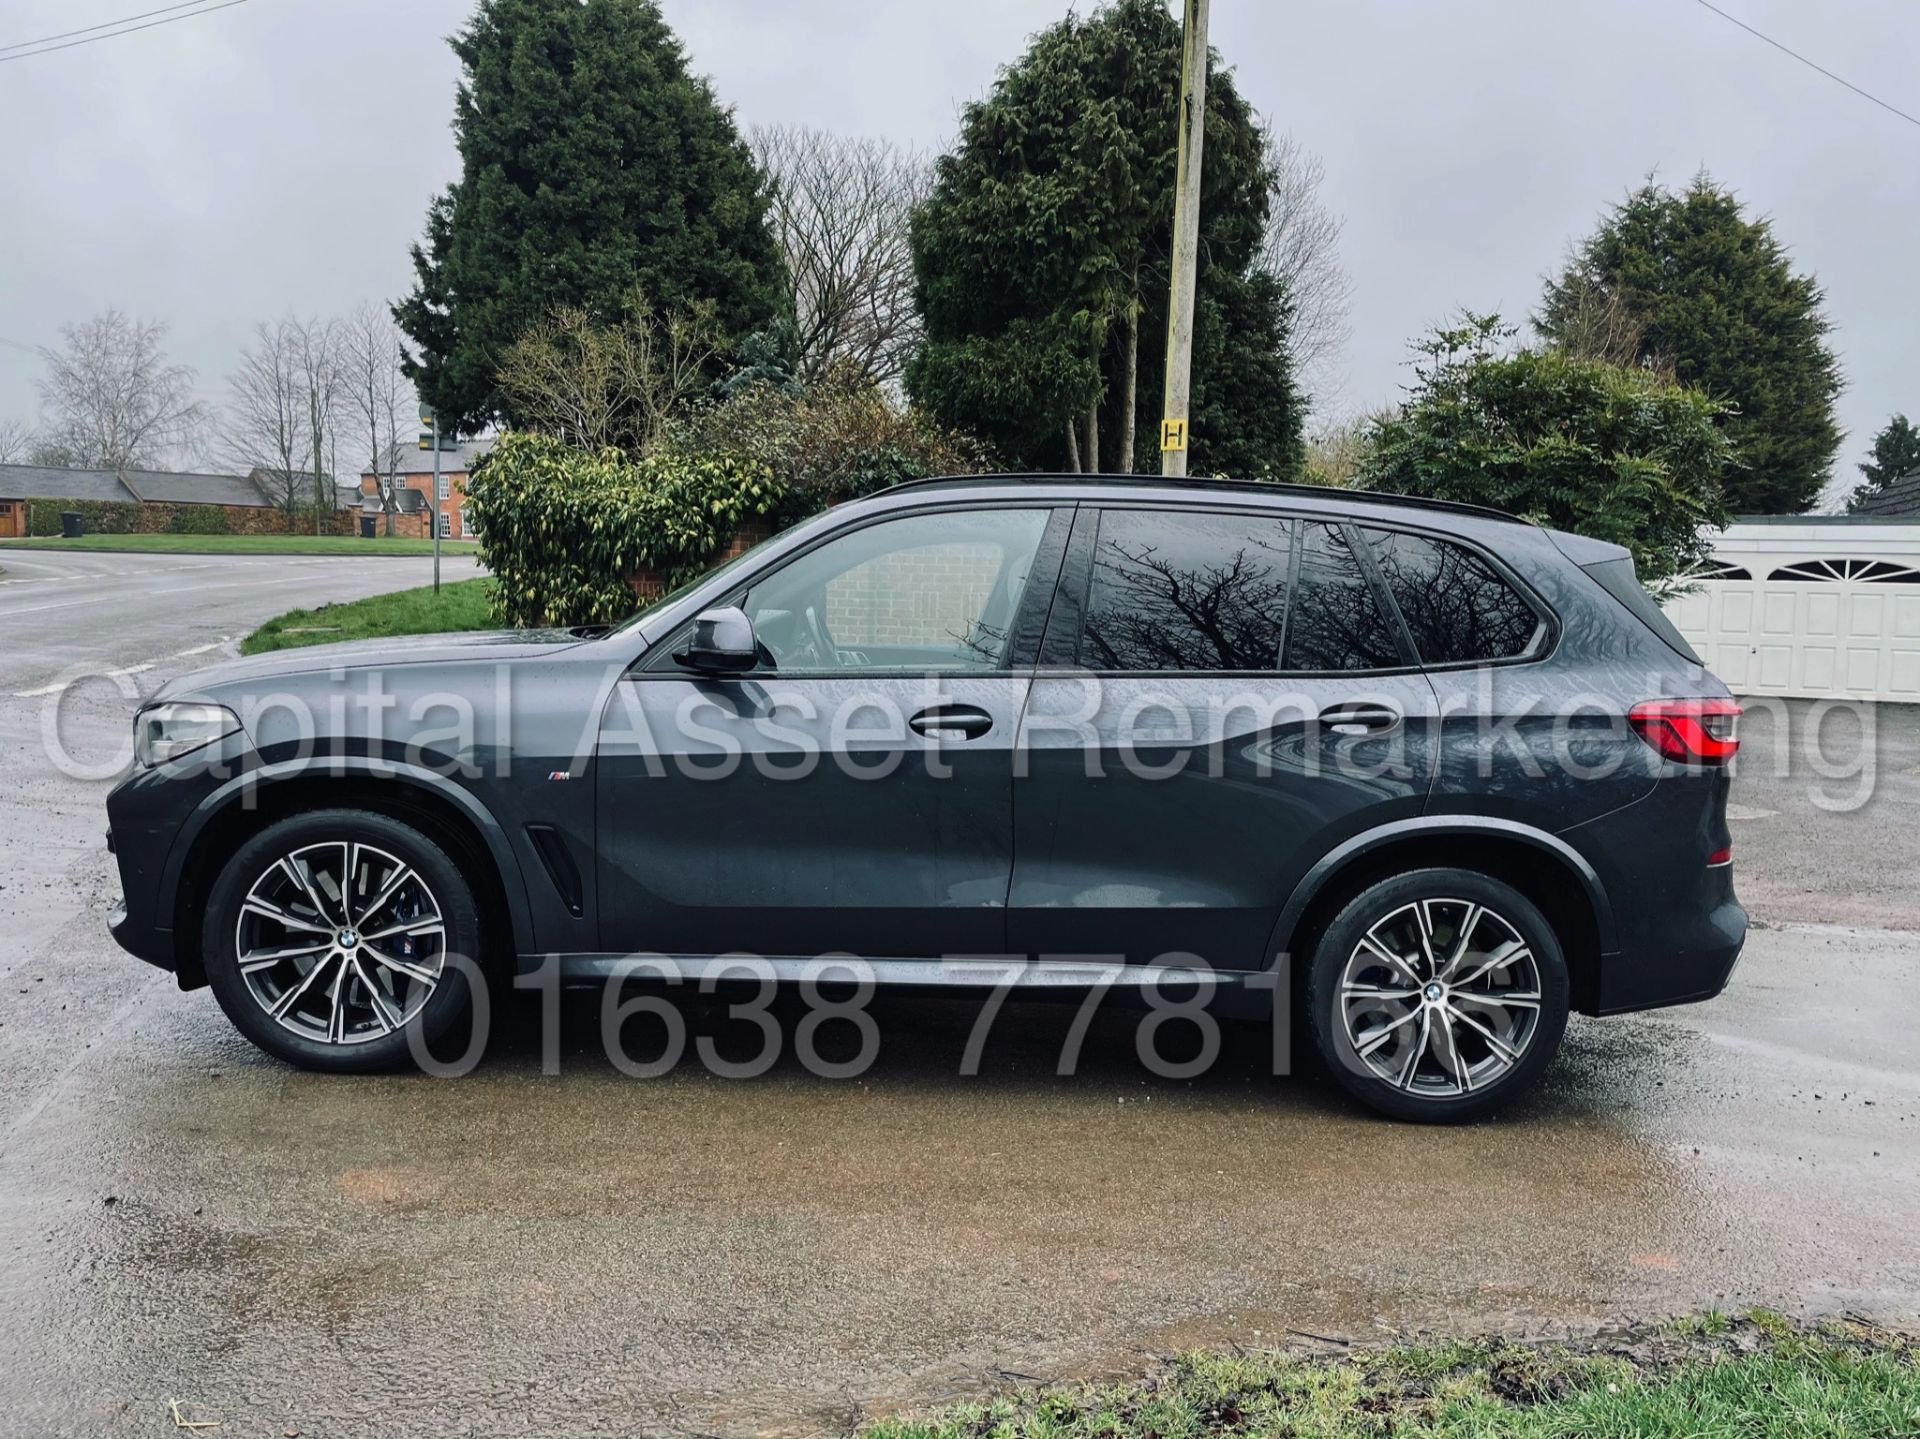 (On Sale) BMW X5 *M SPORT* X-DRIVE *7 SEATER SUV* (2019 - EURO 6) '3.0 DIESEL - AUTO' *PAN ROOF* - Image 8 of 70